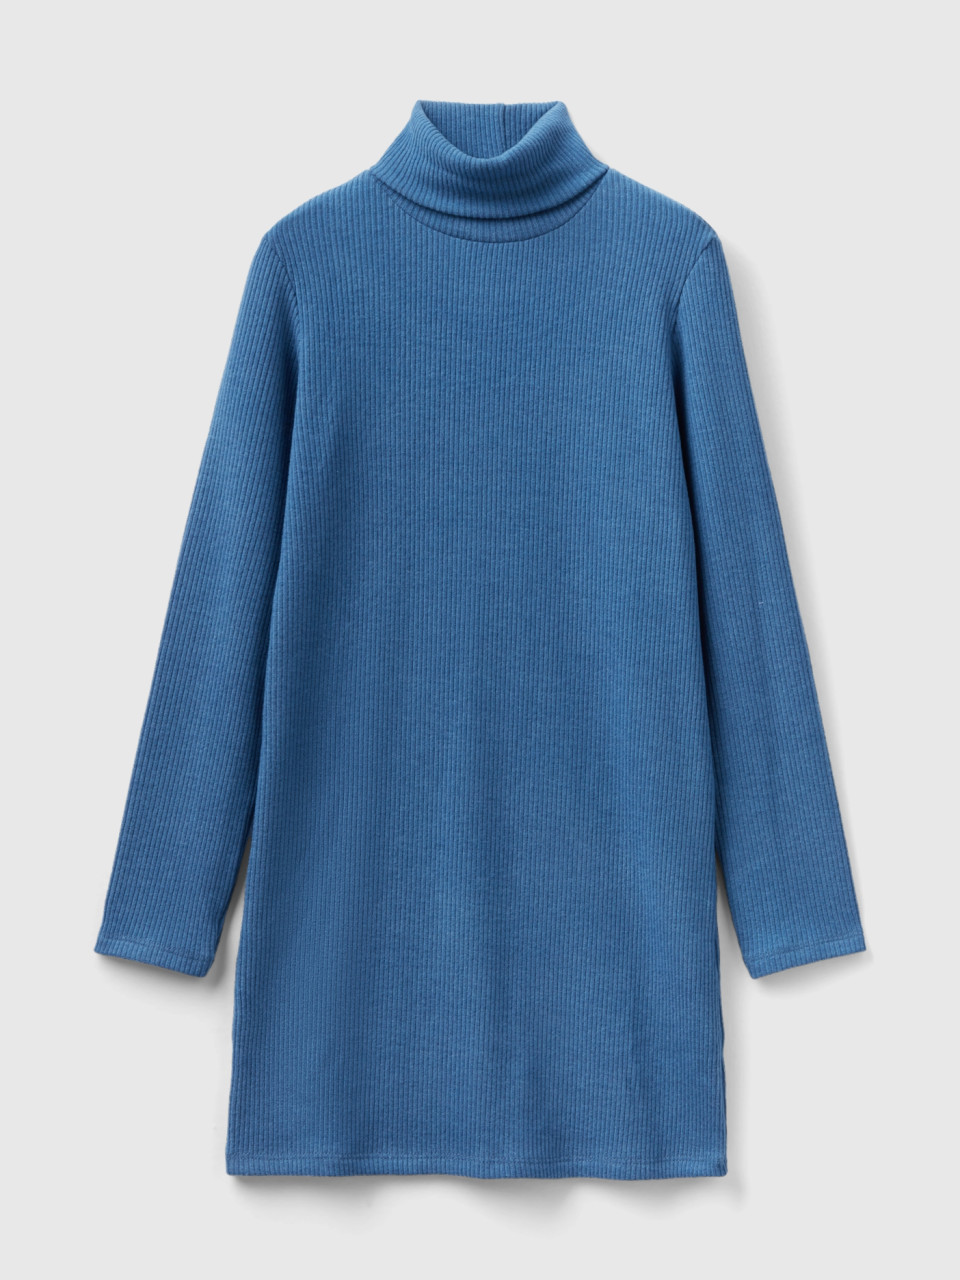 Benetton, Warm Ribbed Turtle Neck Dress, Air Force Blue, Kids